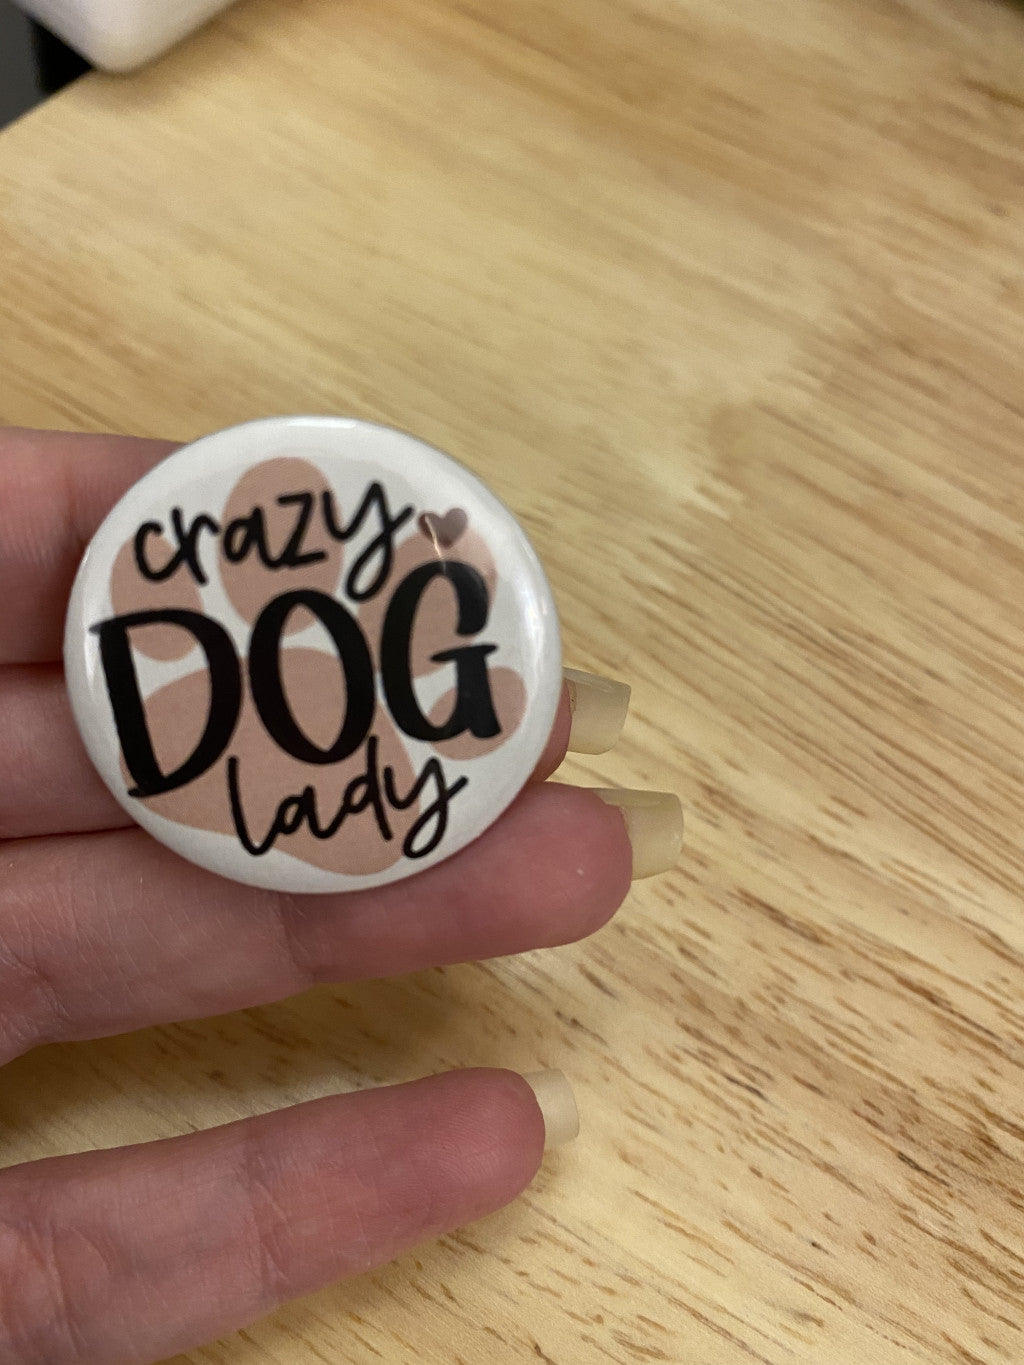 Crazy Dog Lady 1.25" / 2.25" Button Pin